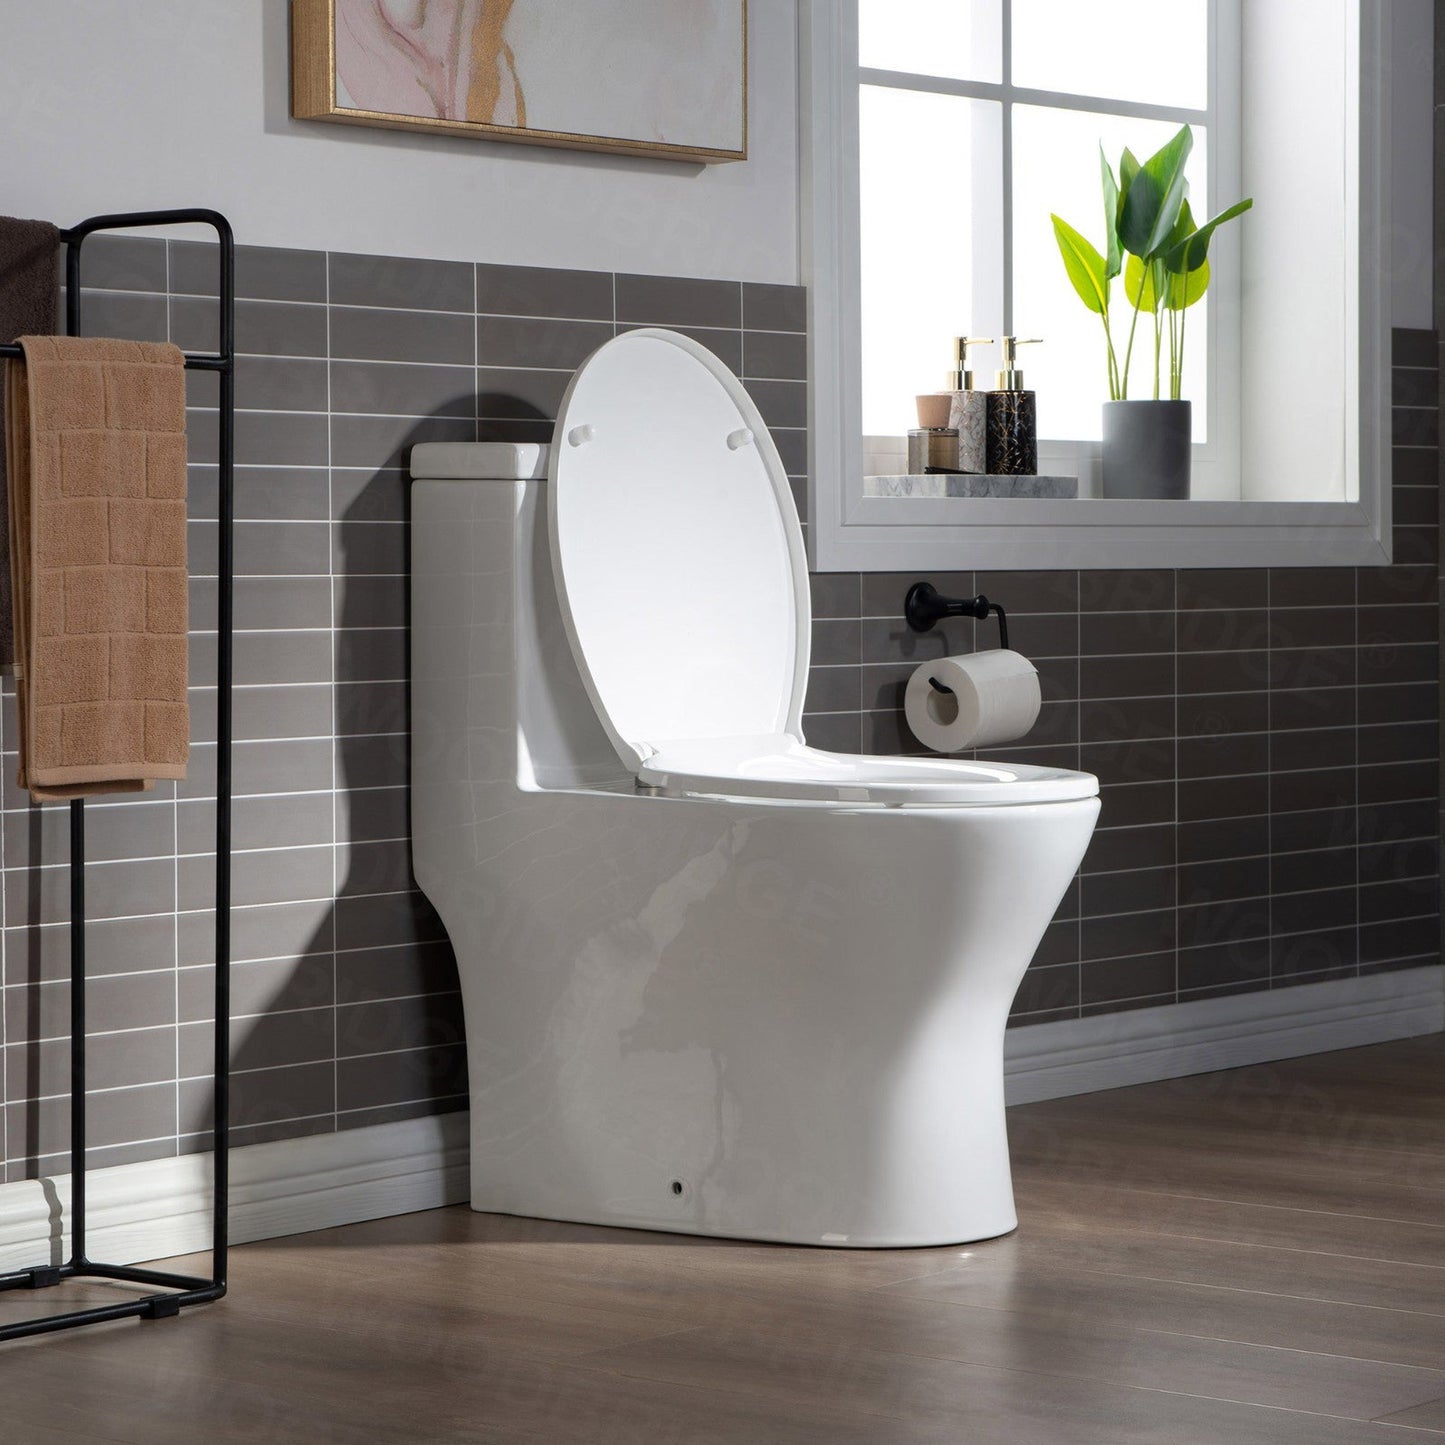 WoodBridge T0031-MB White Short Compact Tiny One Piece Toilet With Soft Closing Seat and Matte Black Finish Button